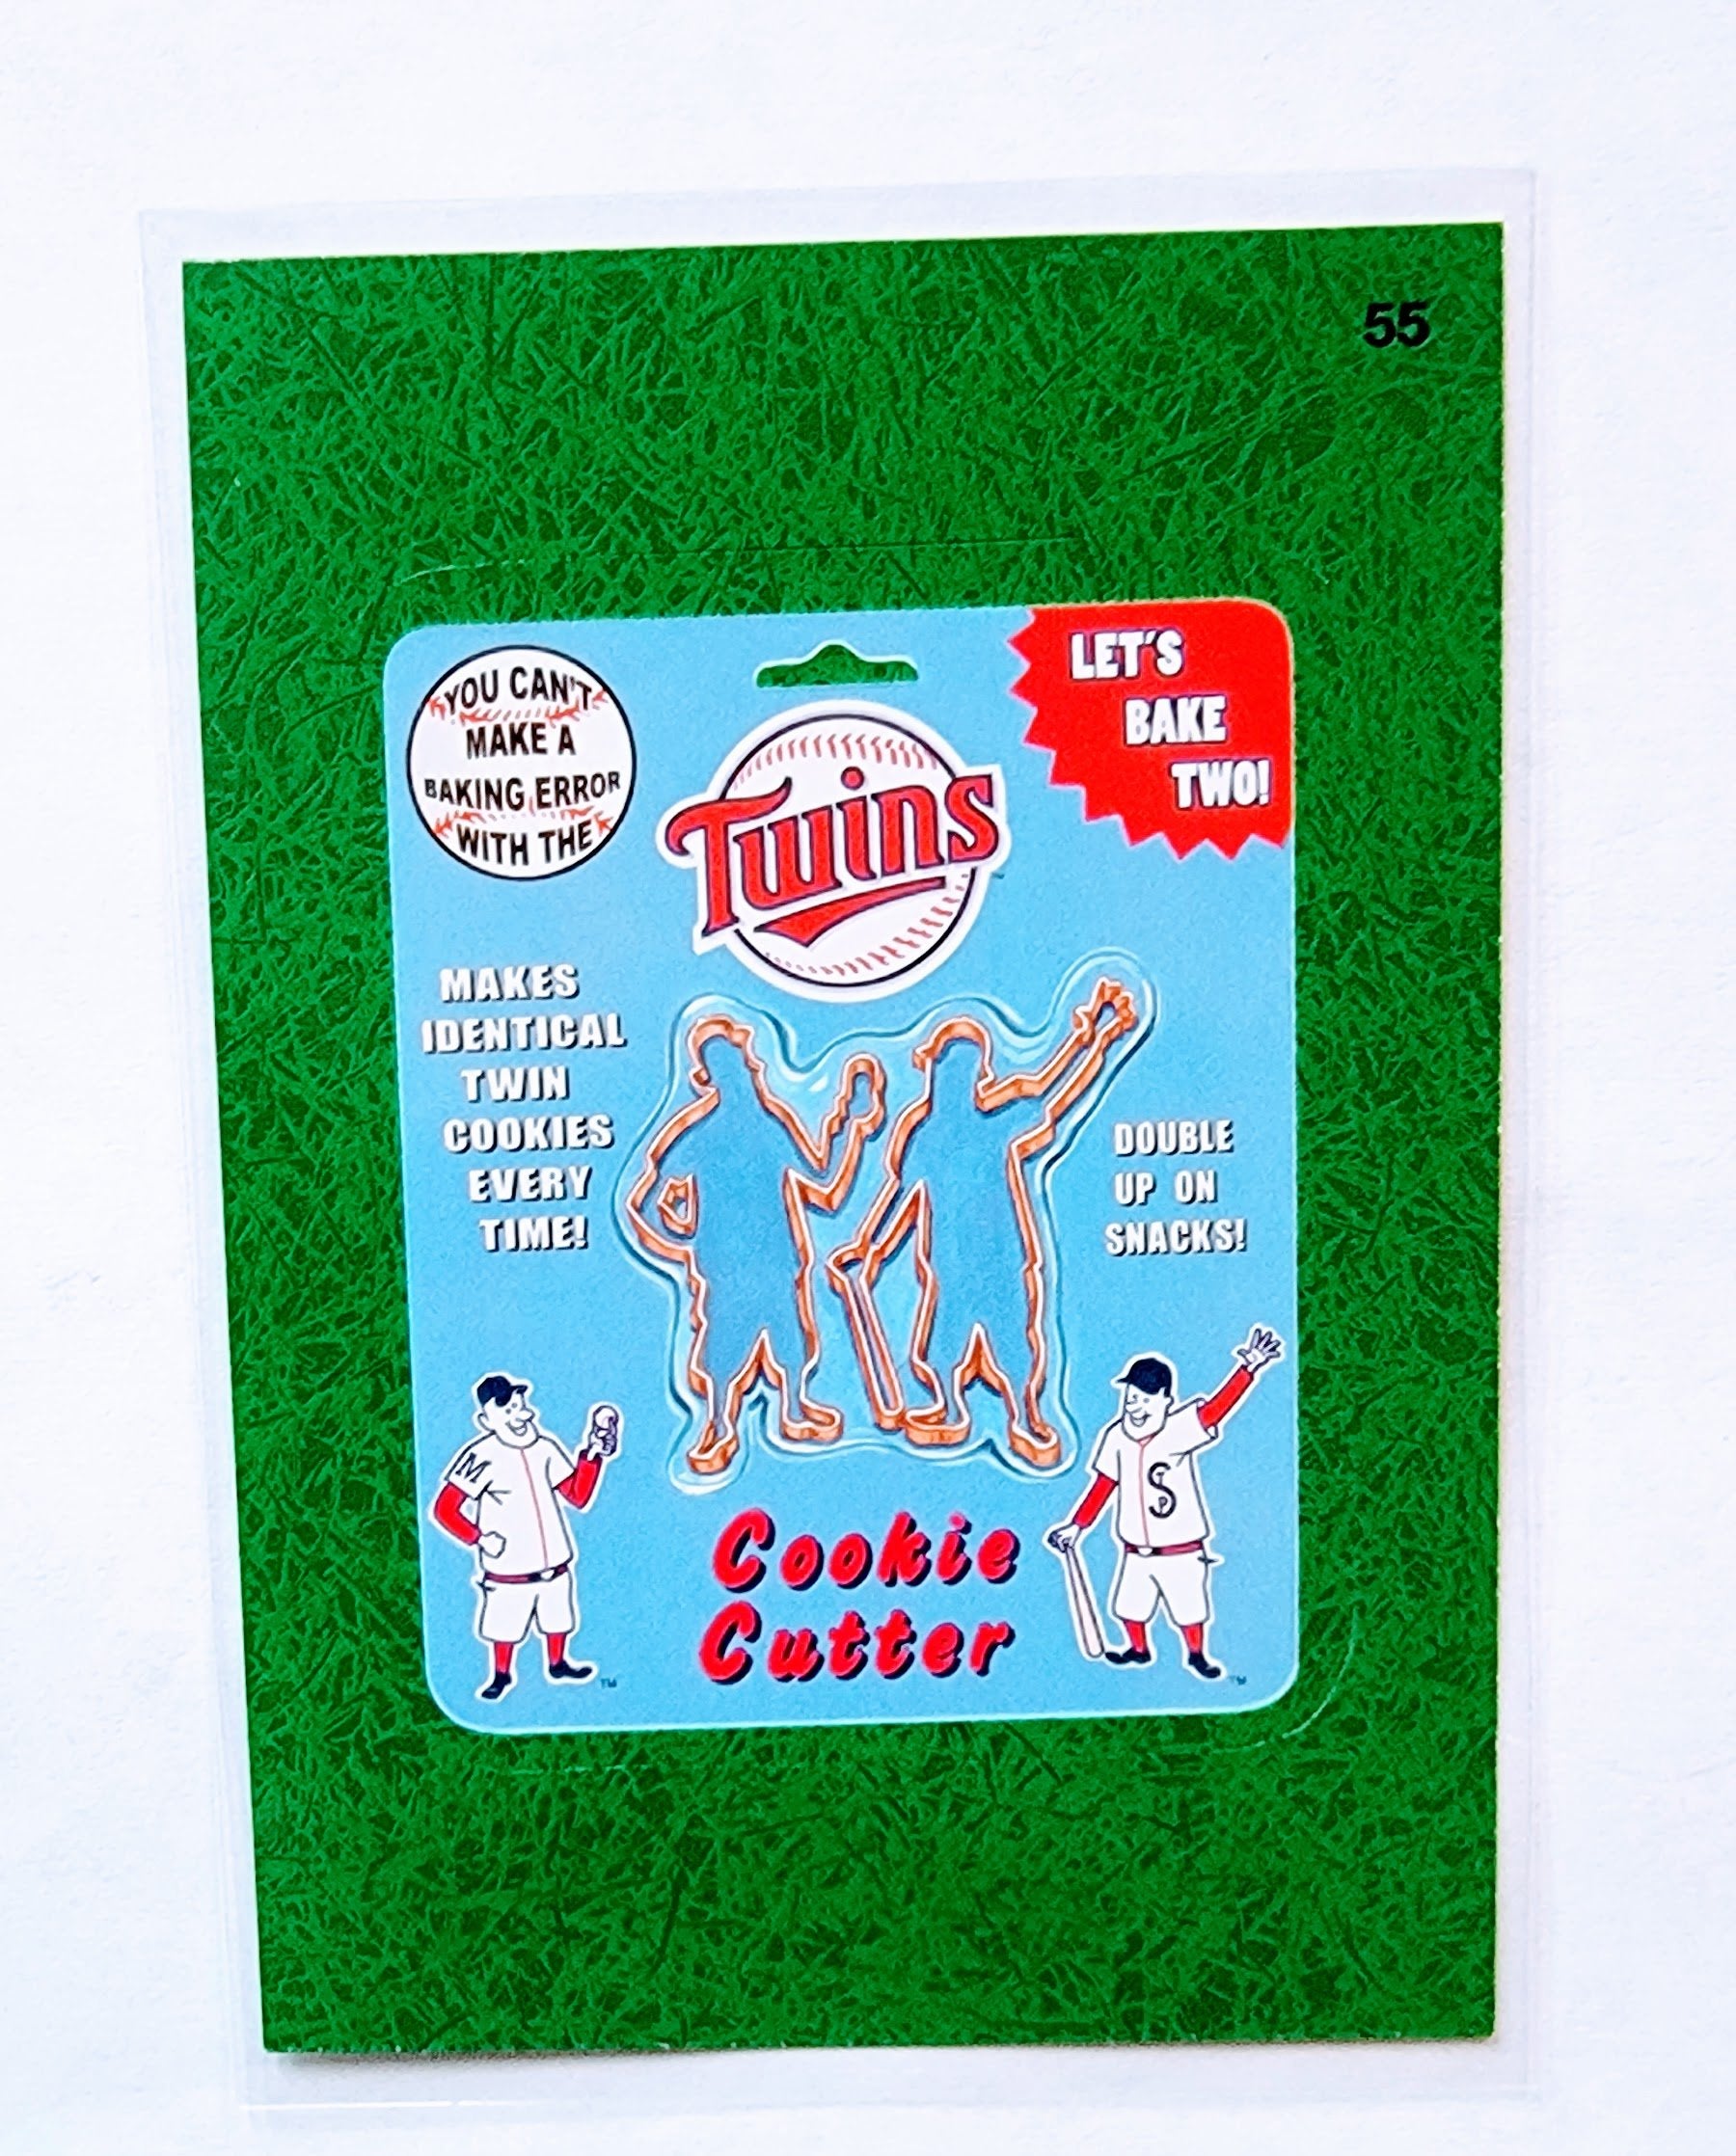 2016 Topps MLB Baseball Wacky Packages Minnesota Twins Cookie Cutter Green Grass Parallel Sticker Trading Card MCSC1 simple Xclusive Collectibles   